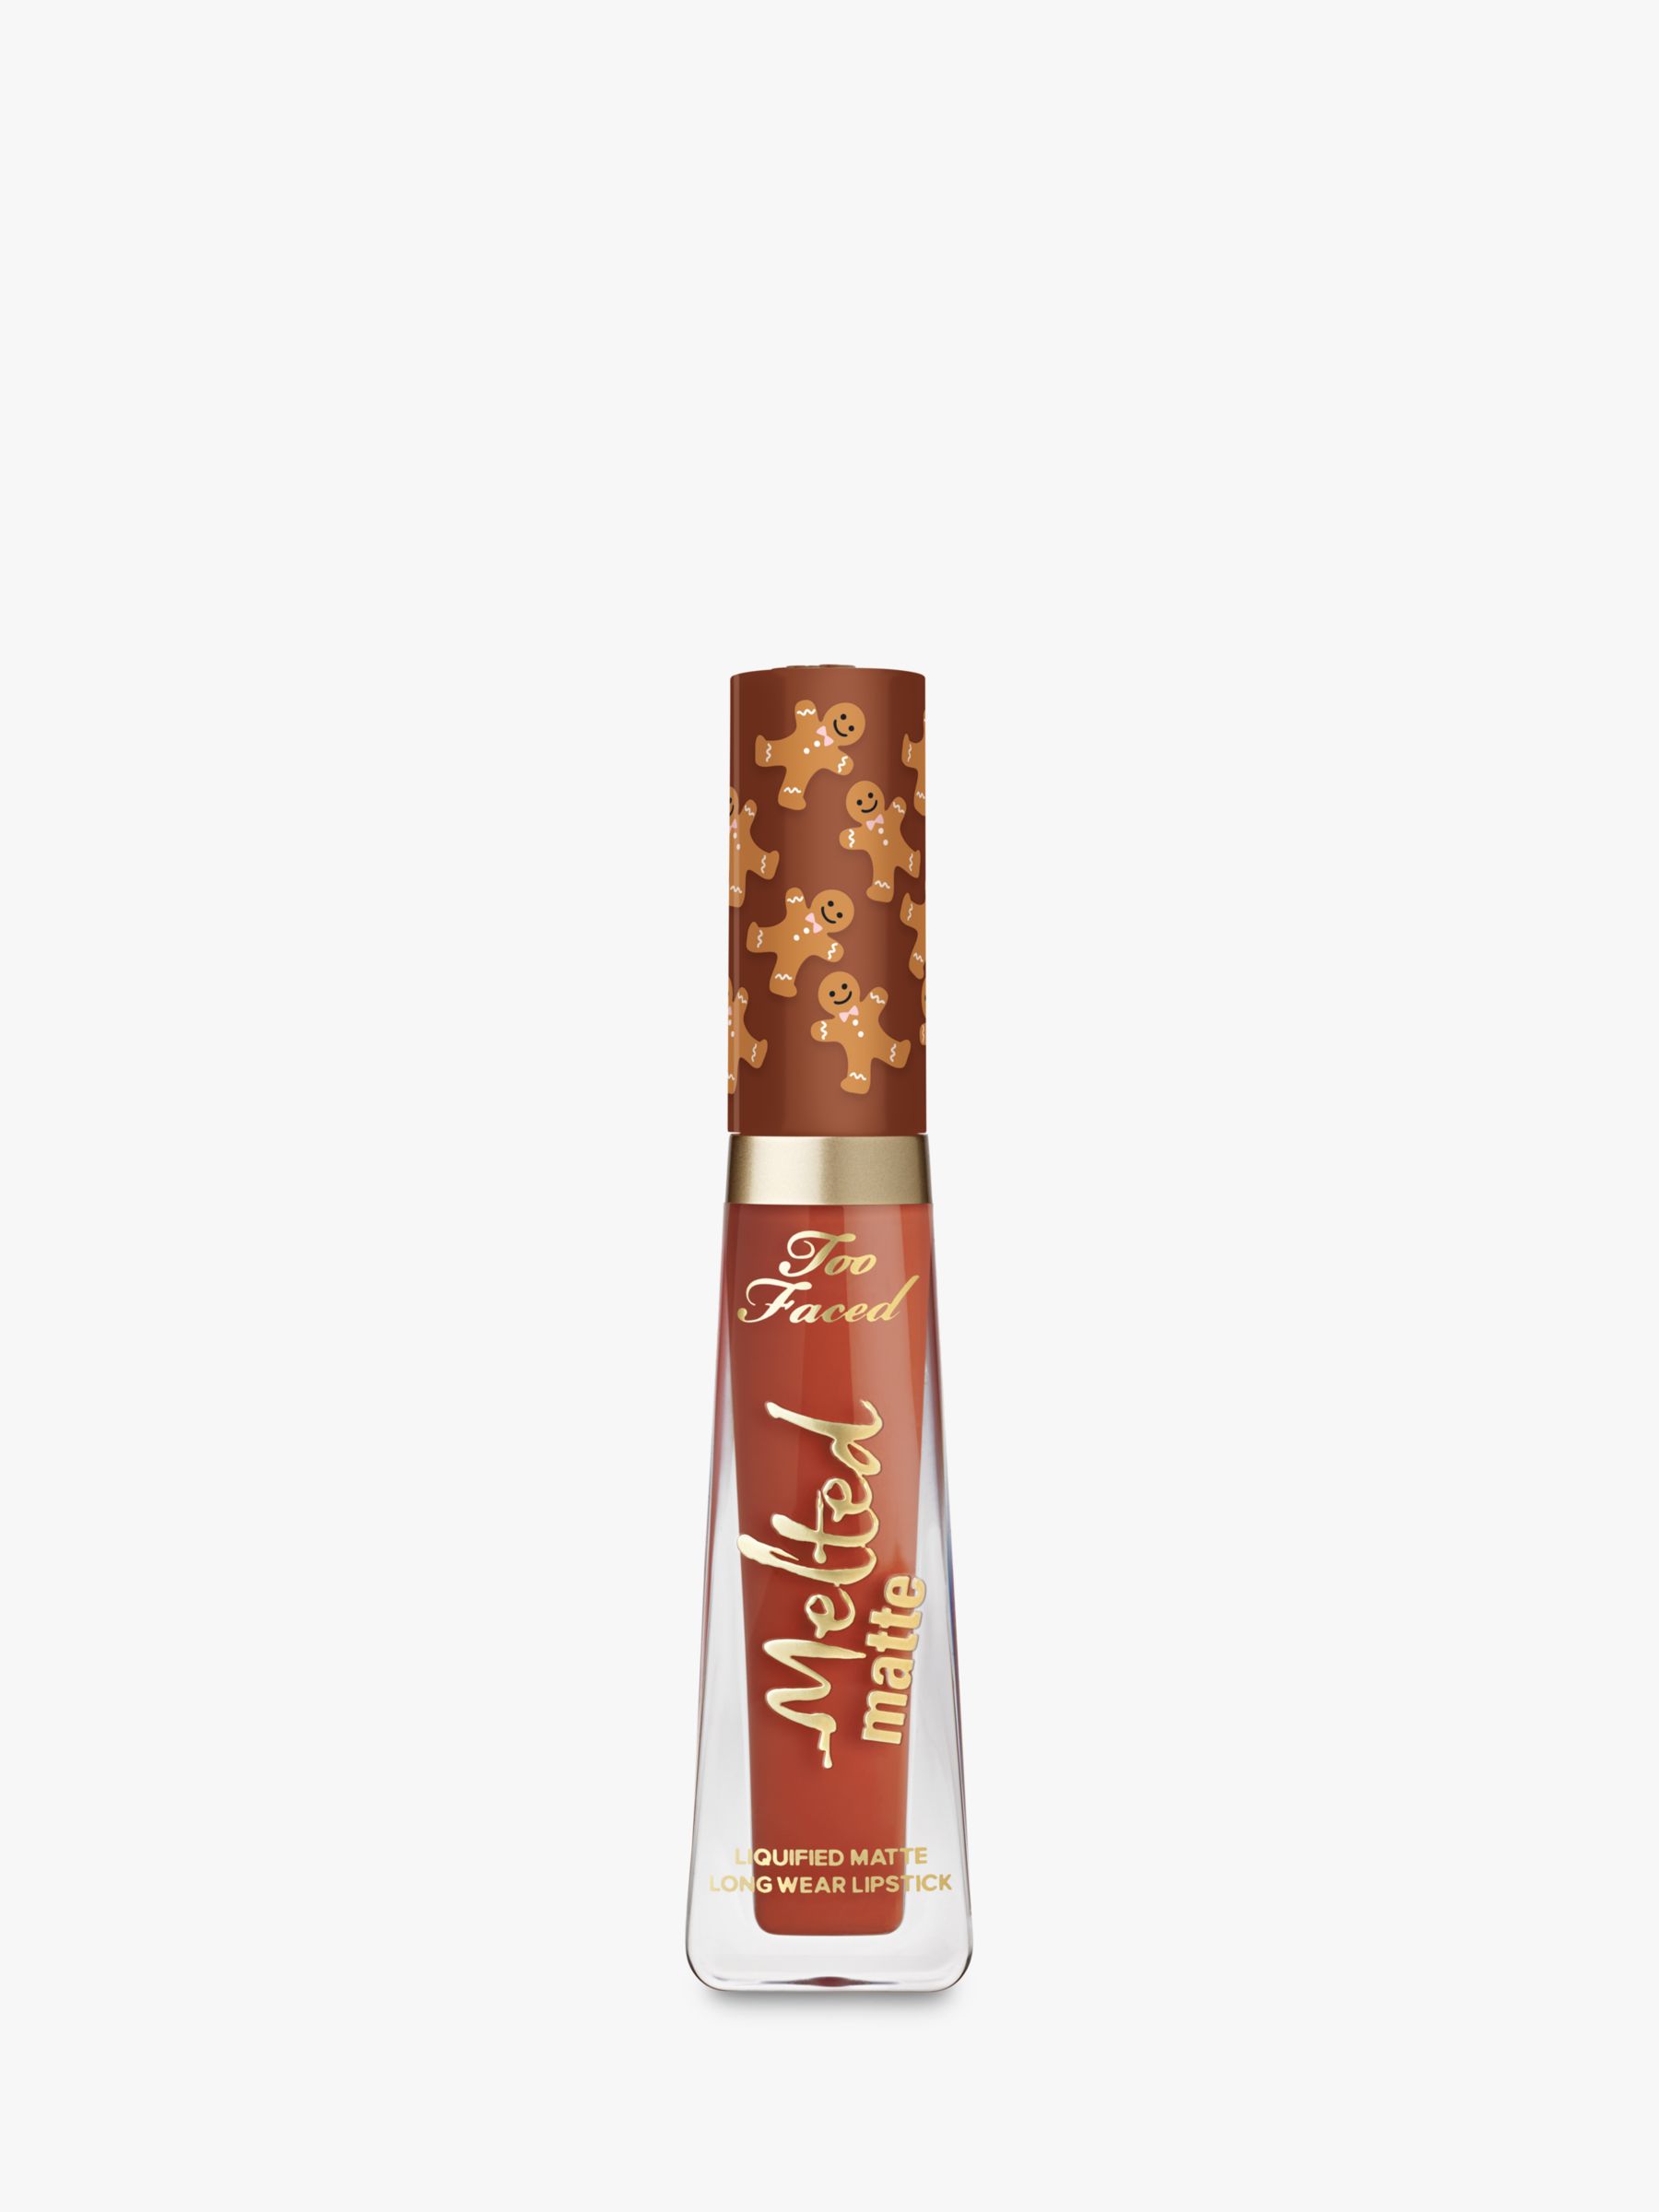 Too Faced Melted Matte Gingerbread Man Lipstick